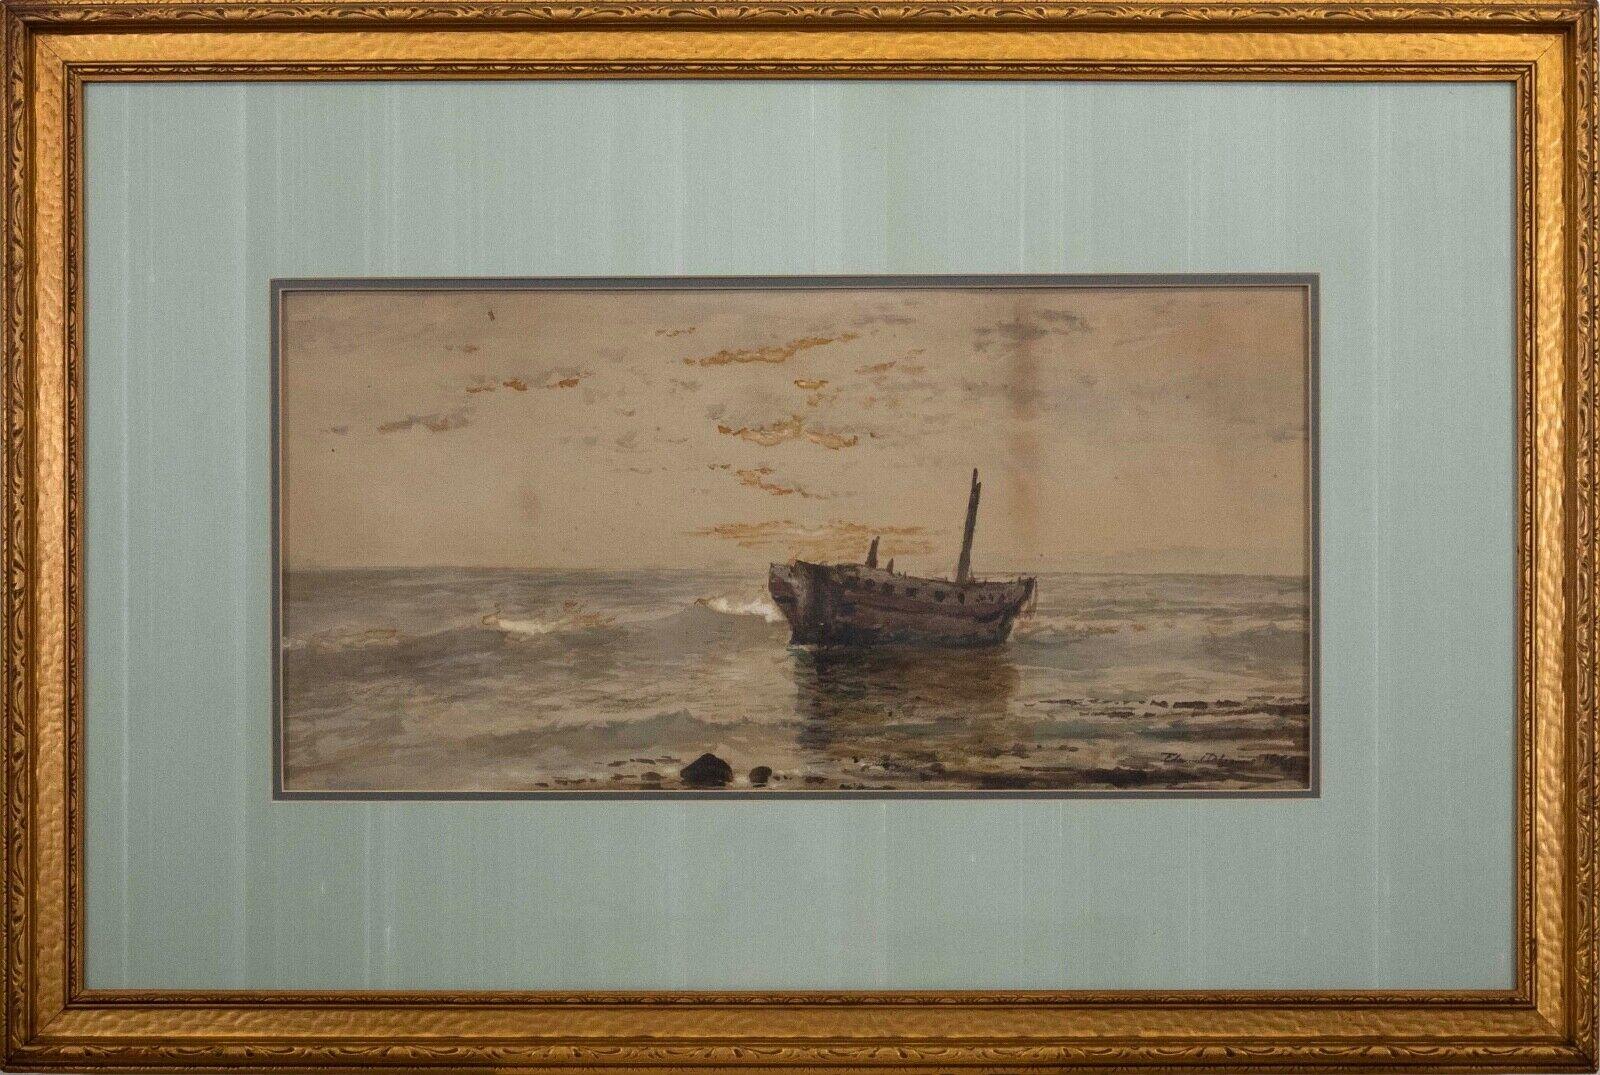 A traditional antique watercolor on paper depicting a boat at sea by Edmund Darch Lewis. Signed on the bottom right and dated 1867. Edmund Darch Lewis (1835-1910) was an American landscape painter known for his prolific style and marine oils and